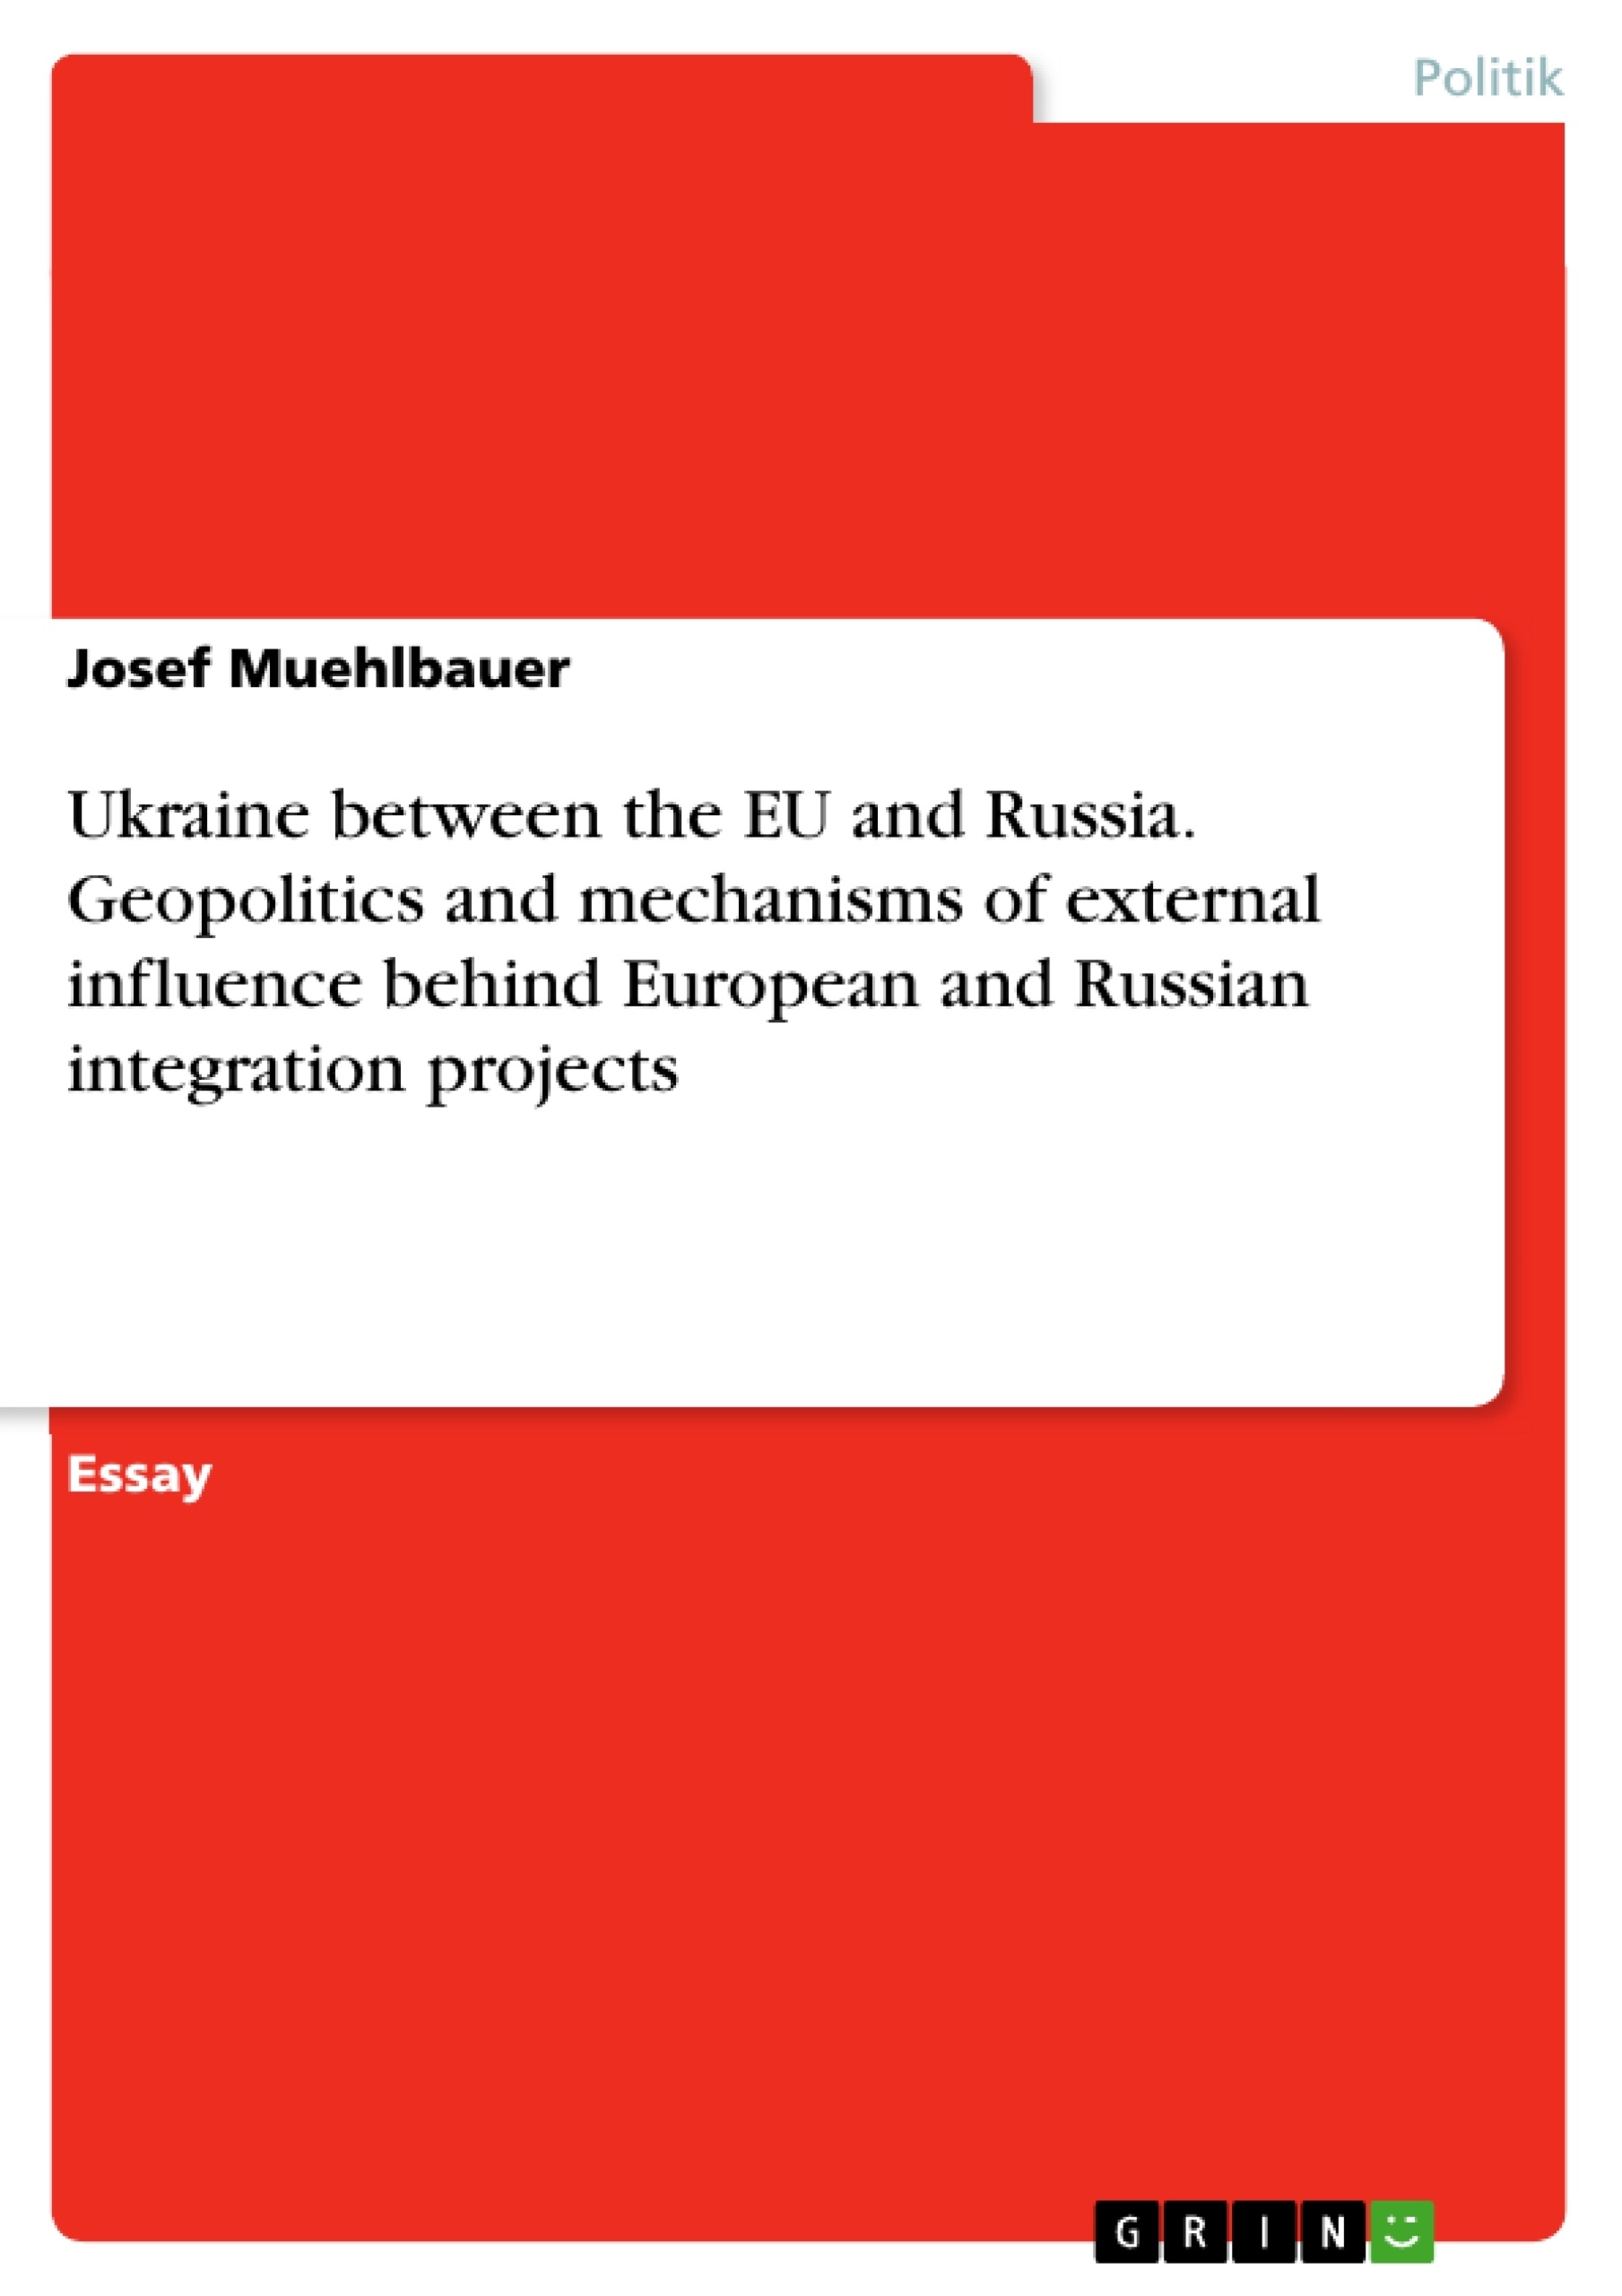 Titel: Ukraine between the EU and Russia. Geopolitics and mechanisms of external influence behind European and Russian integration projects